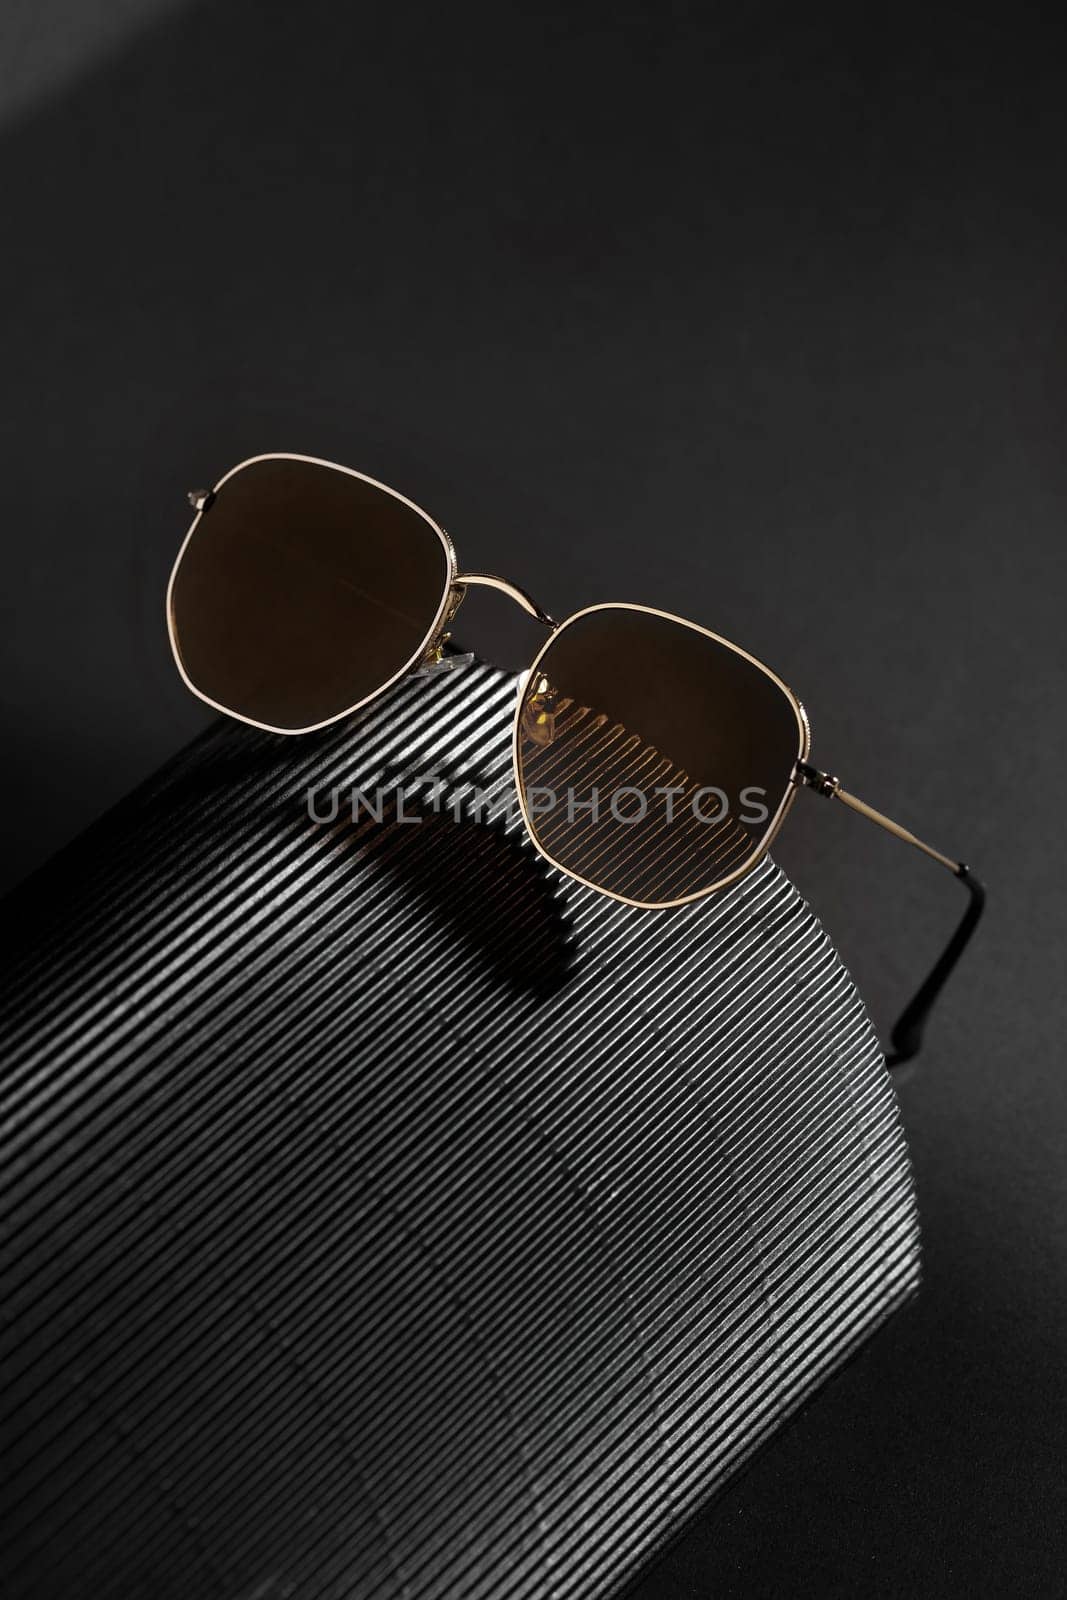 Trendy sunglasses background. Fashion summer accessories. Copy space for text. Black gold concept. Optic store discount poster by Gravika